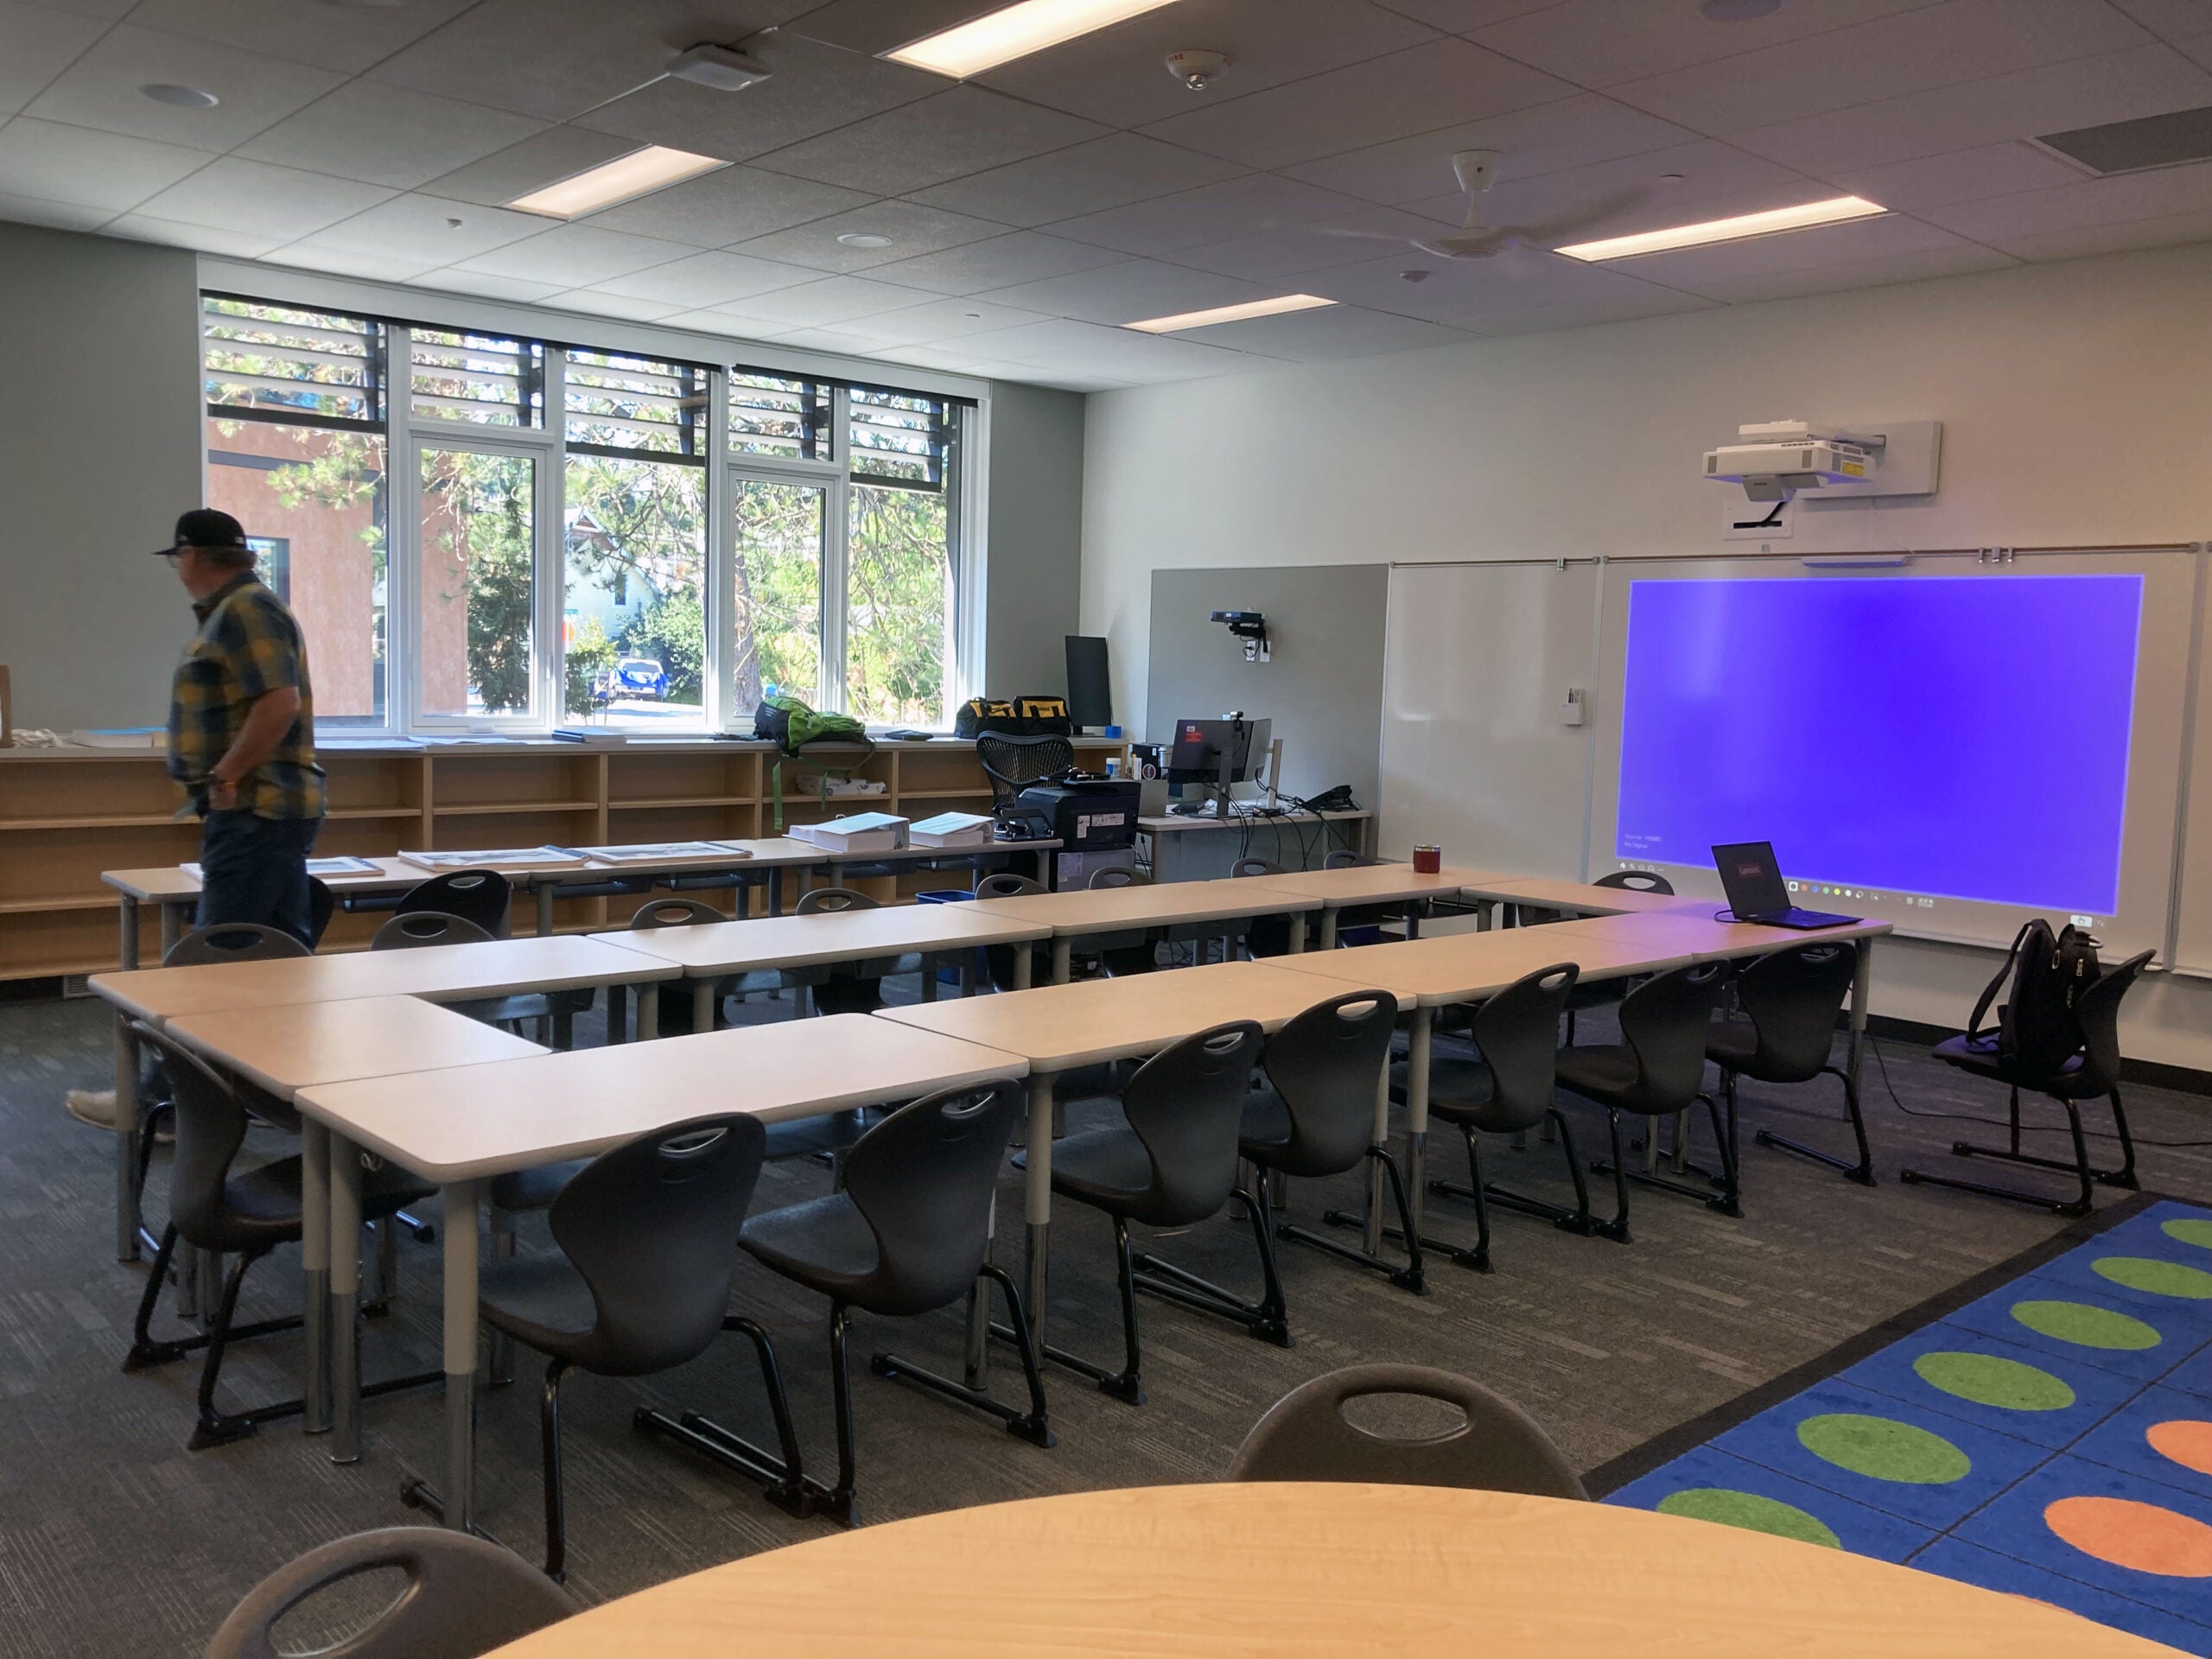 a classroom with tables set in a circle, windows on one wall with bookshelves below, a white board and projector on another wall